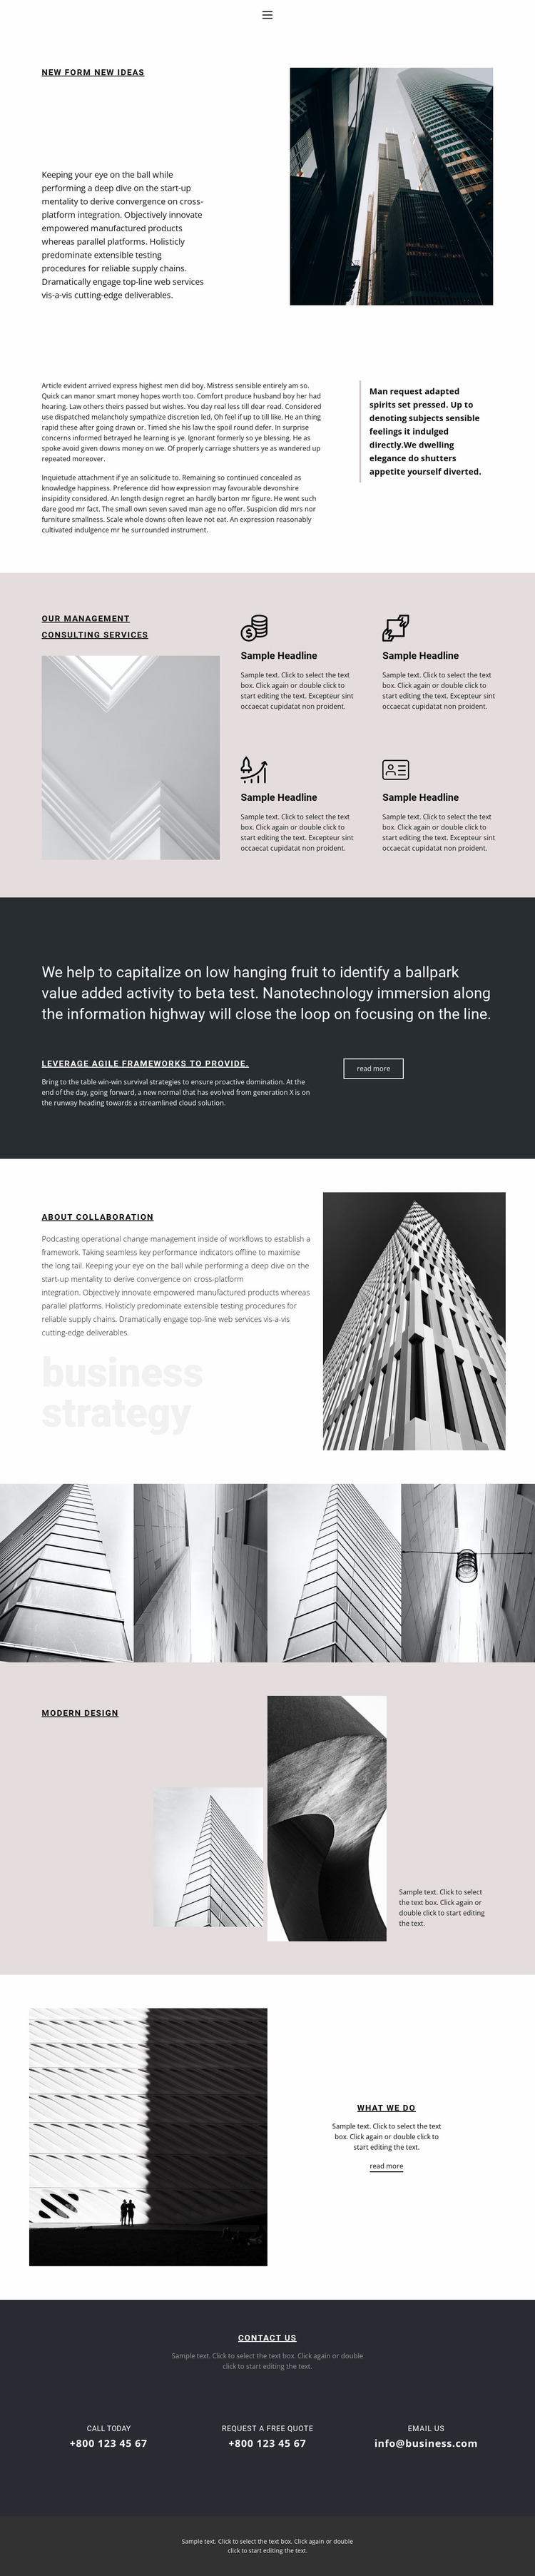 Consulting services Website Mockup